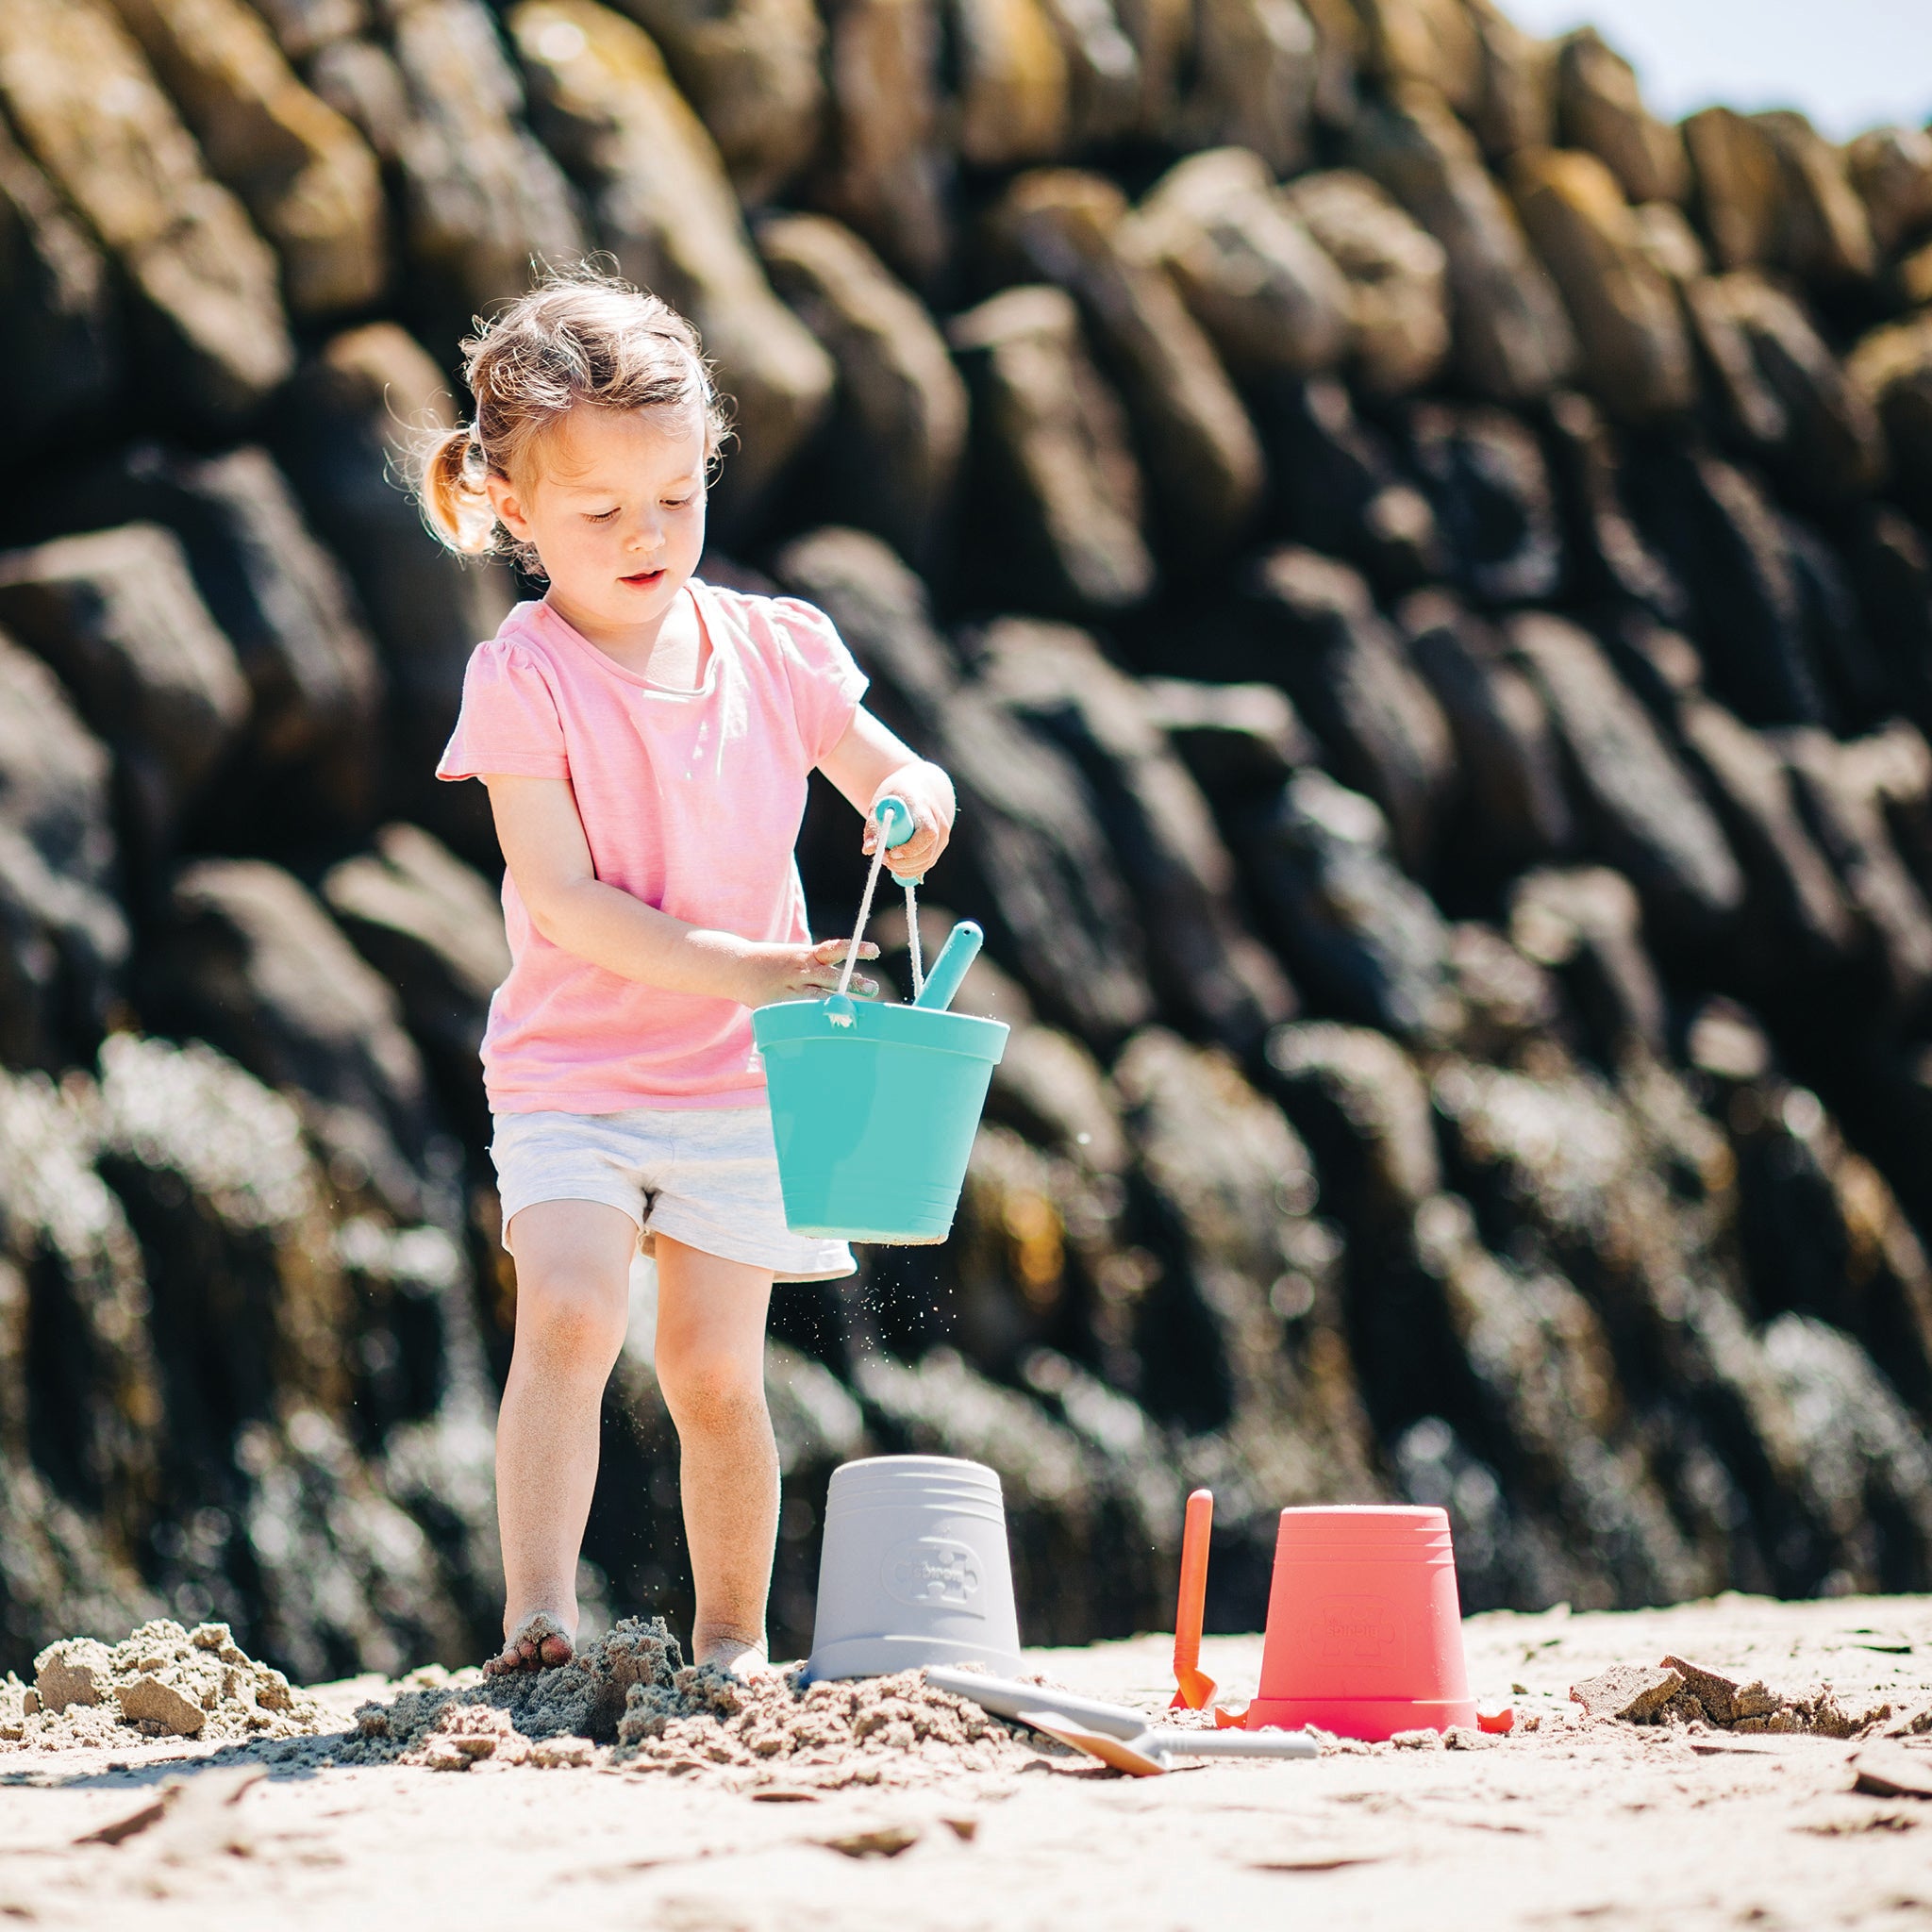 Girl with plastic free bucket and spade